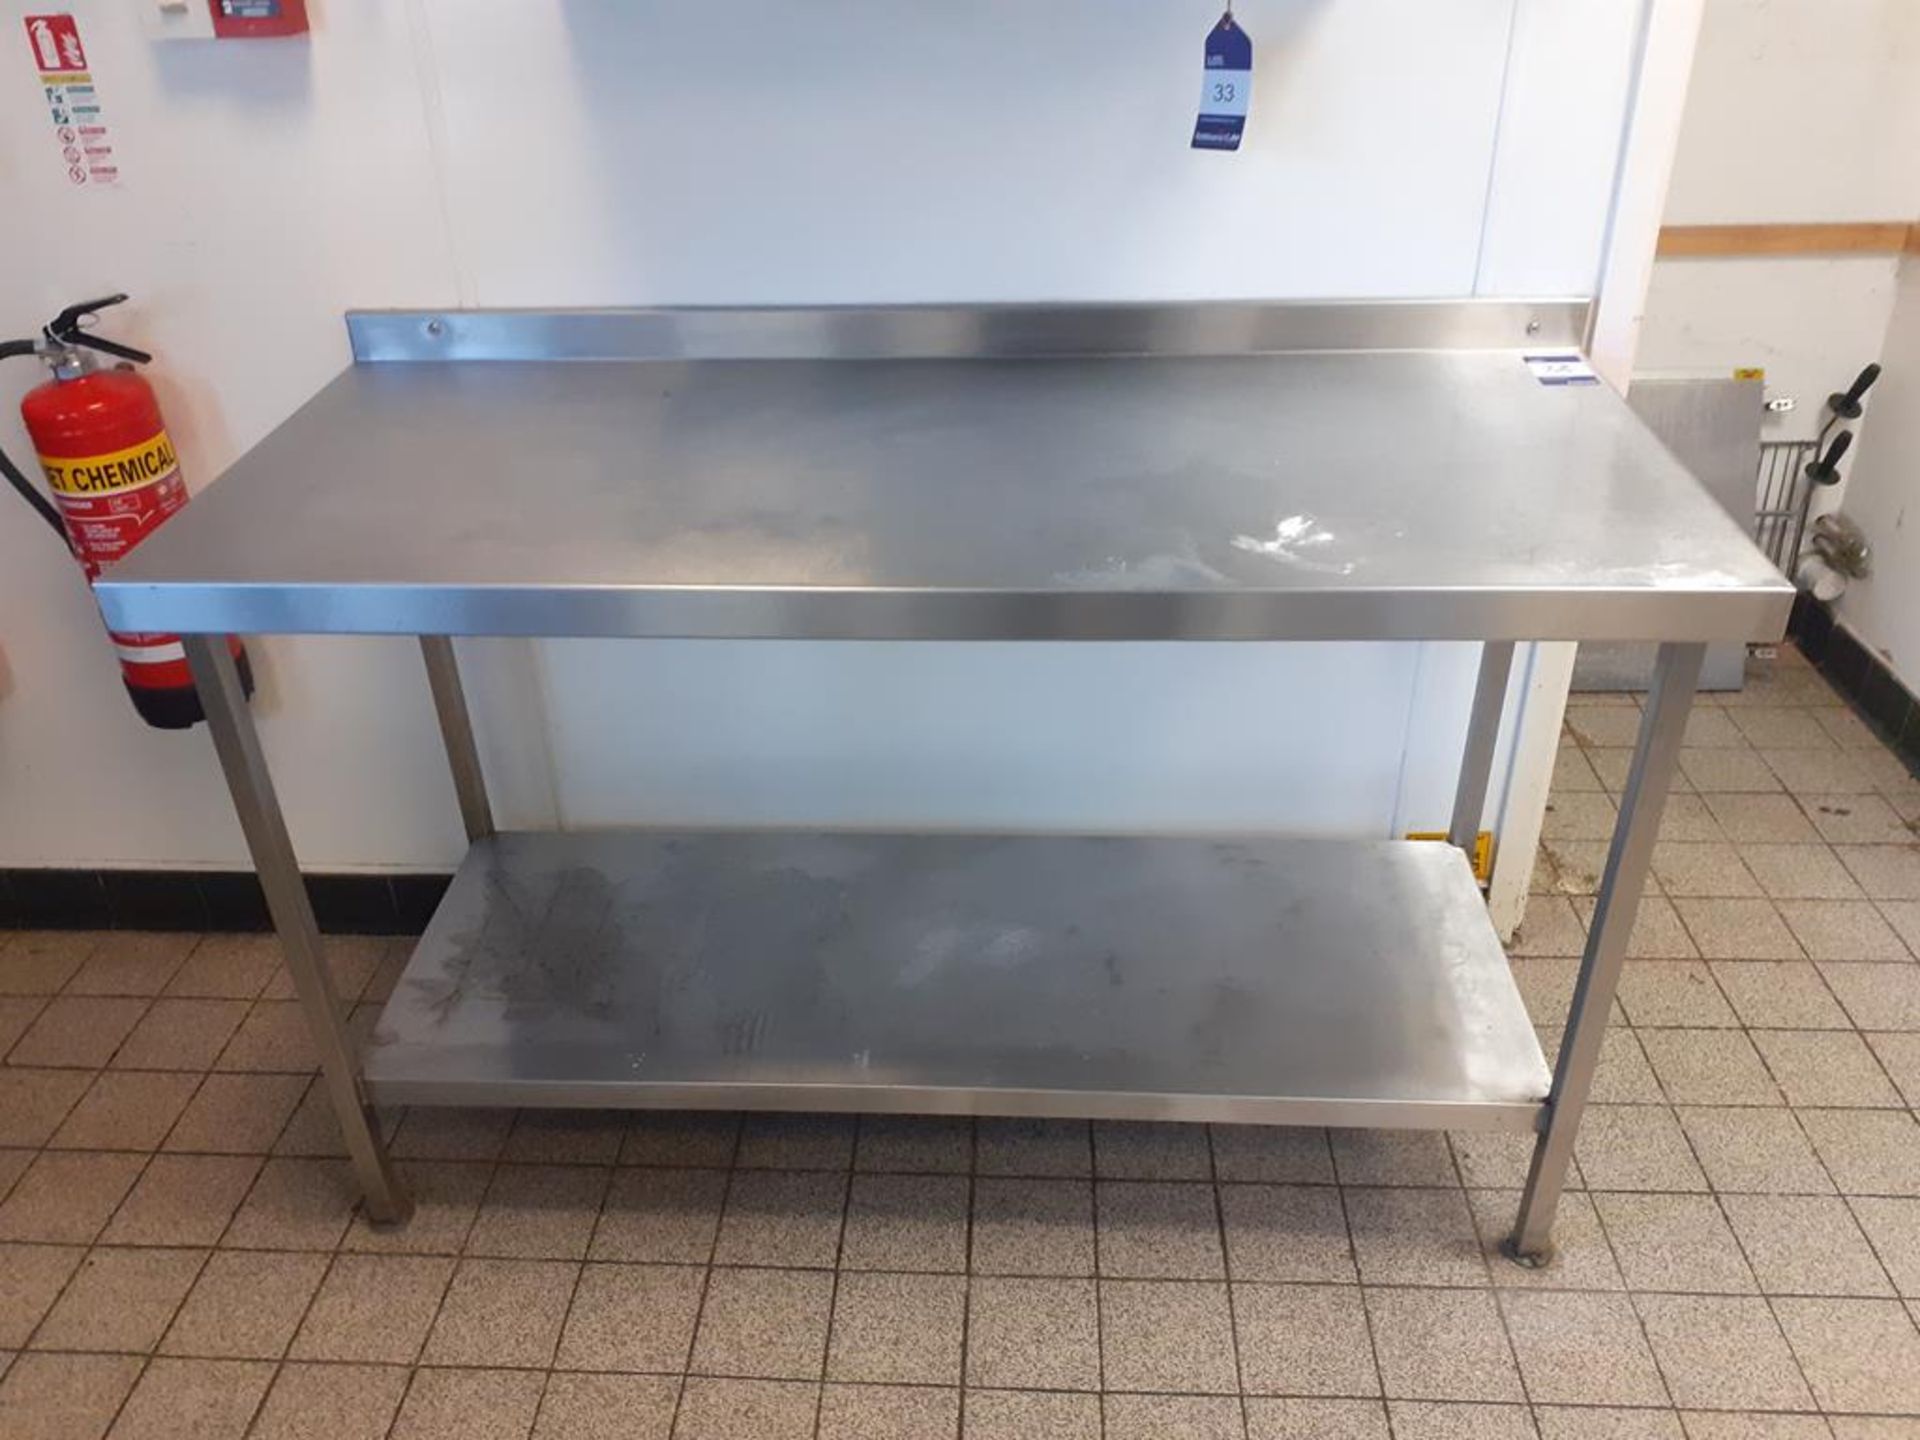 6x Various Sizes S/S Prep Tables, 1x Sissons S/S Sink Unit and 1x S/S Mobile Prep Table - Image 4 of 6